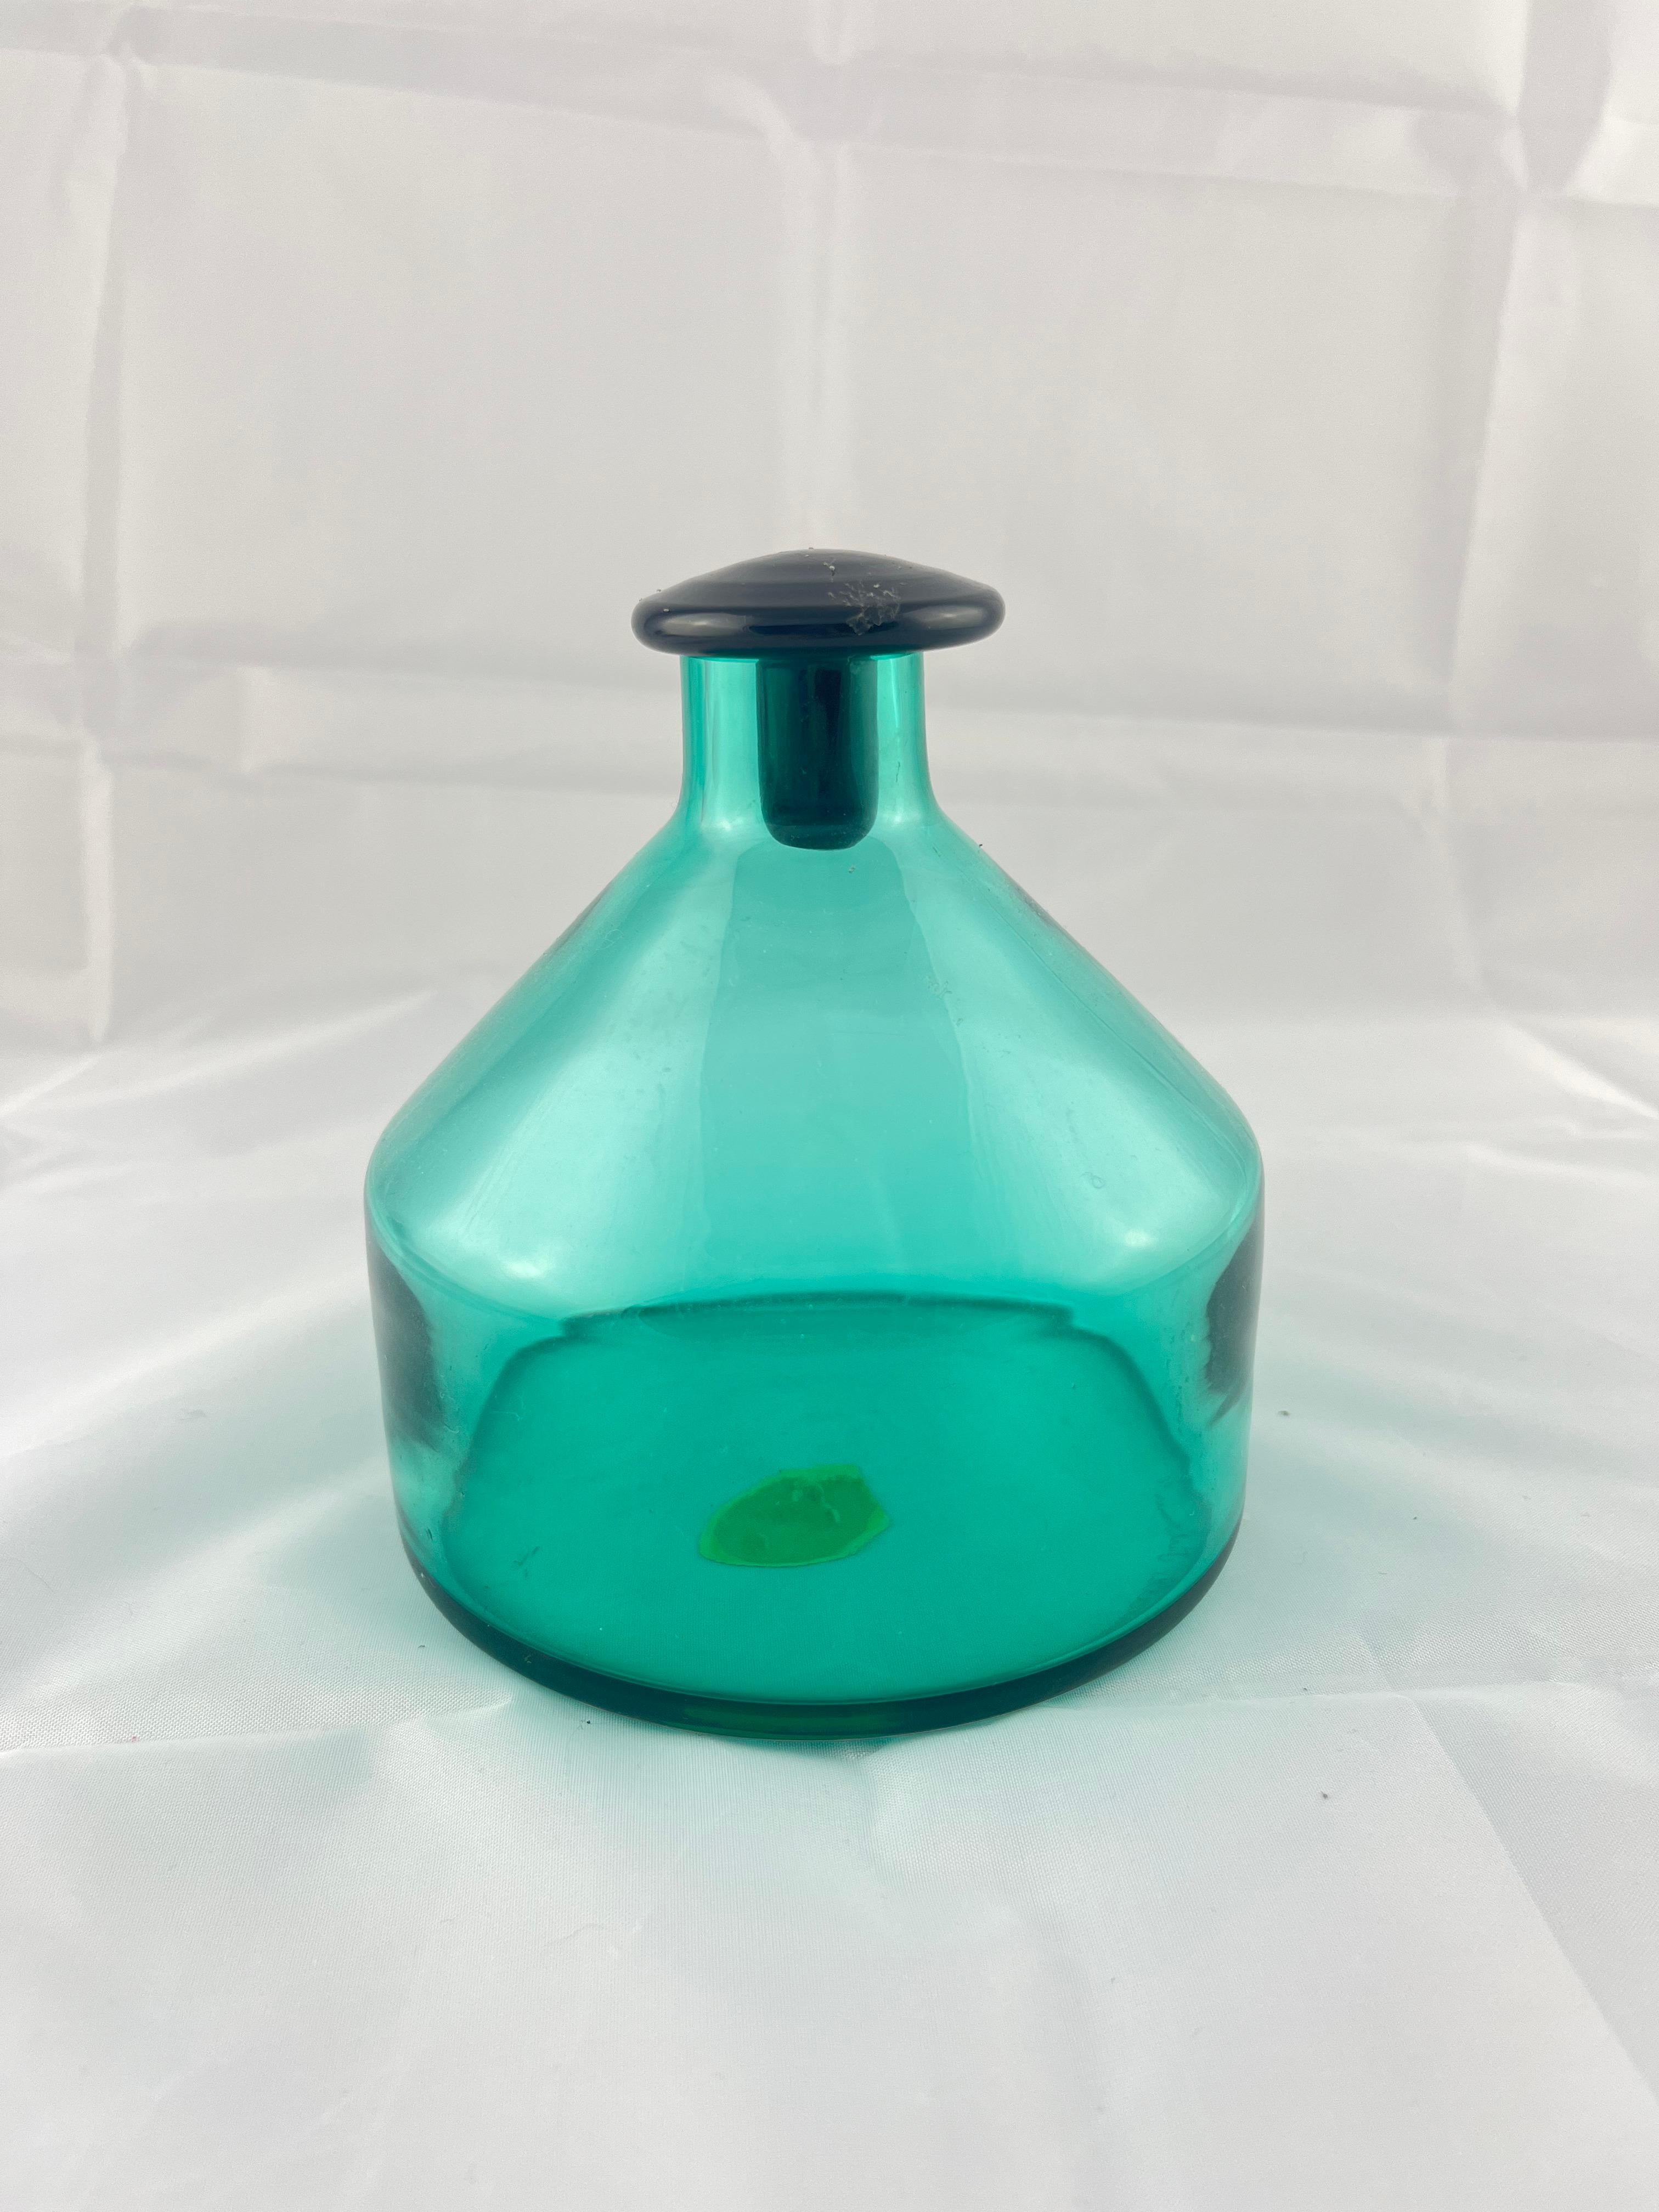 Small Murano glass vase signed on acid Marcello Furlan - 1990

In Great Condition